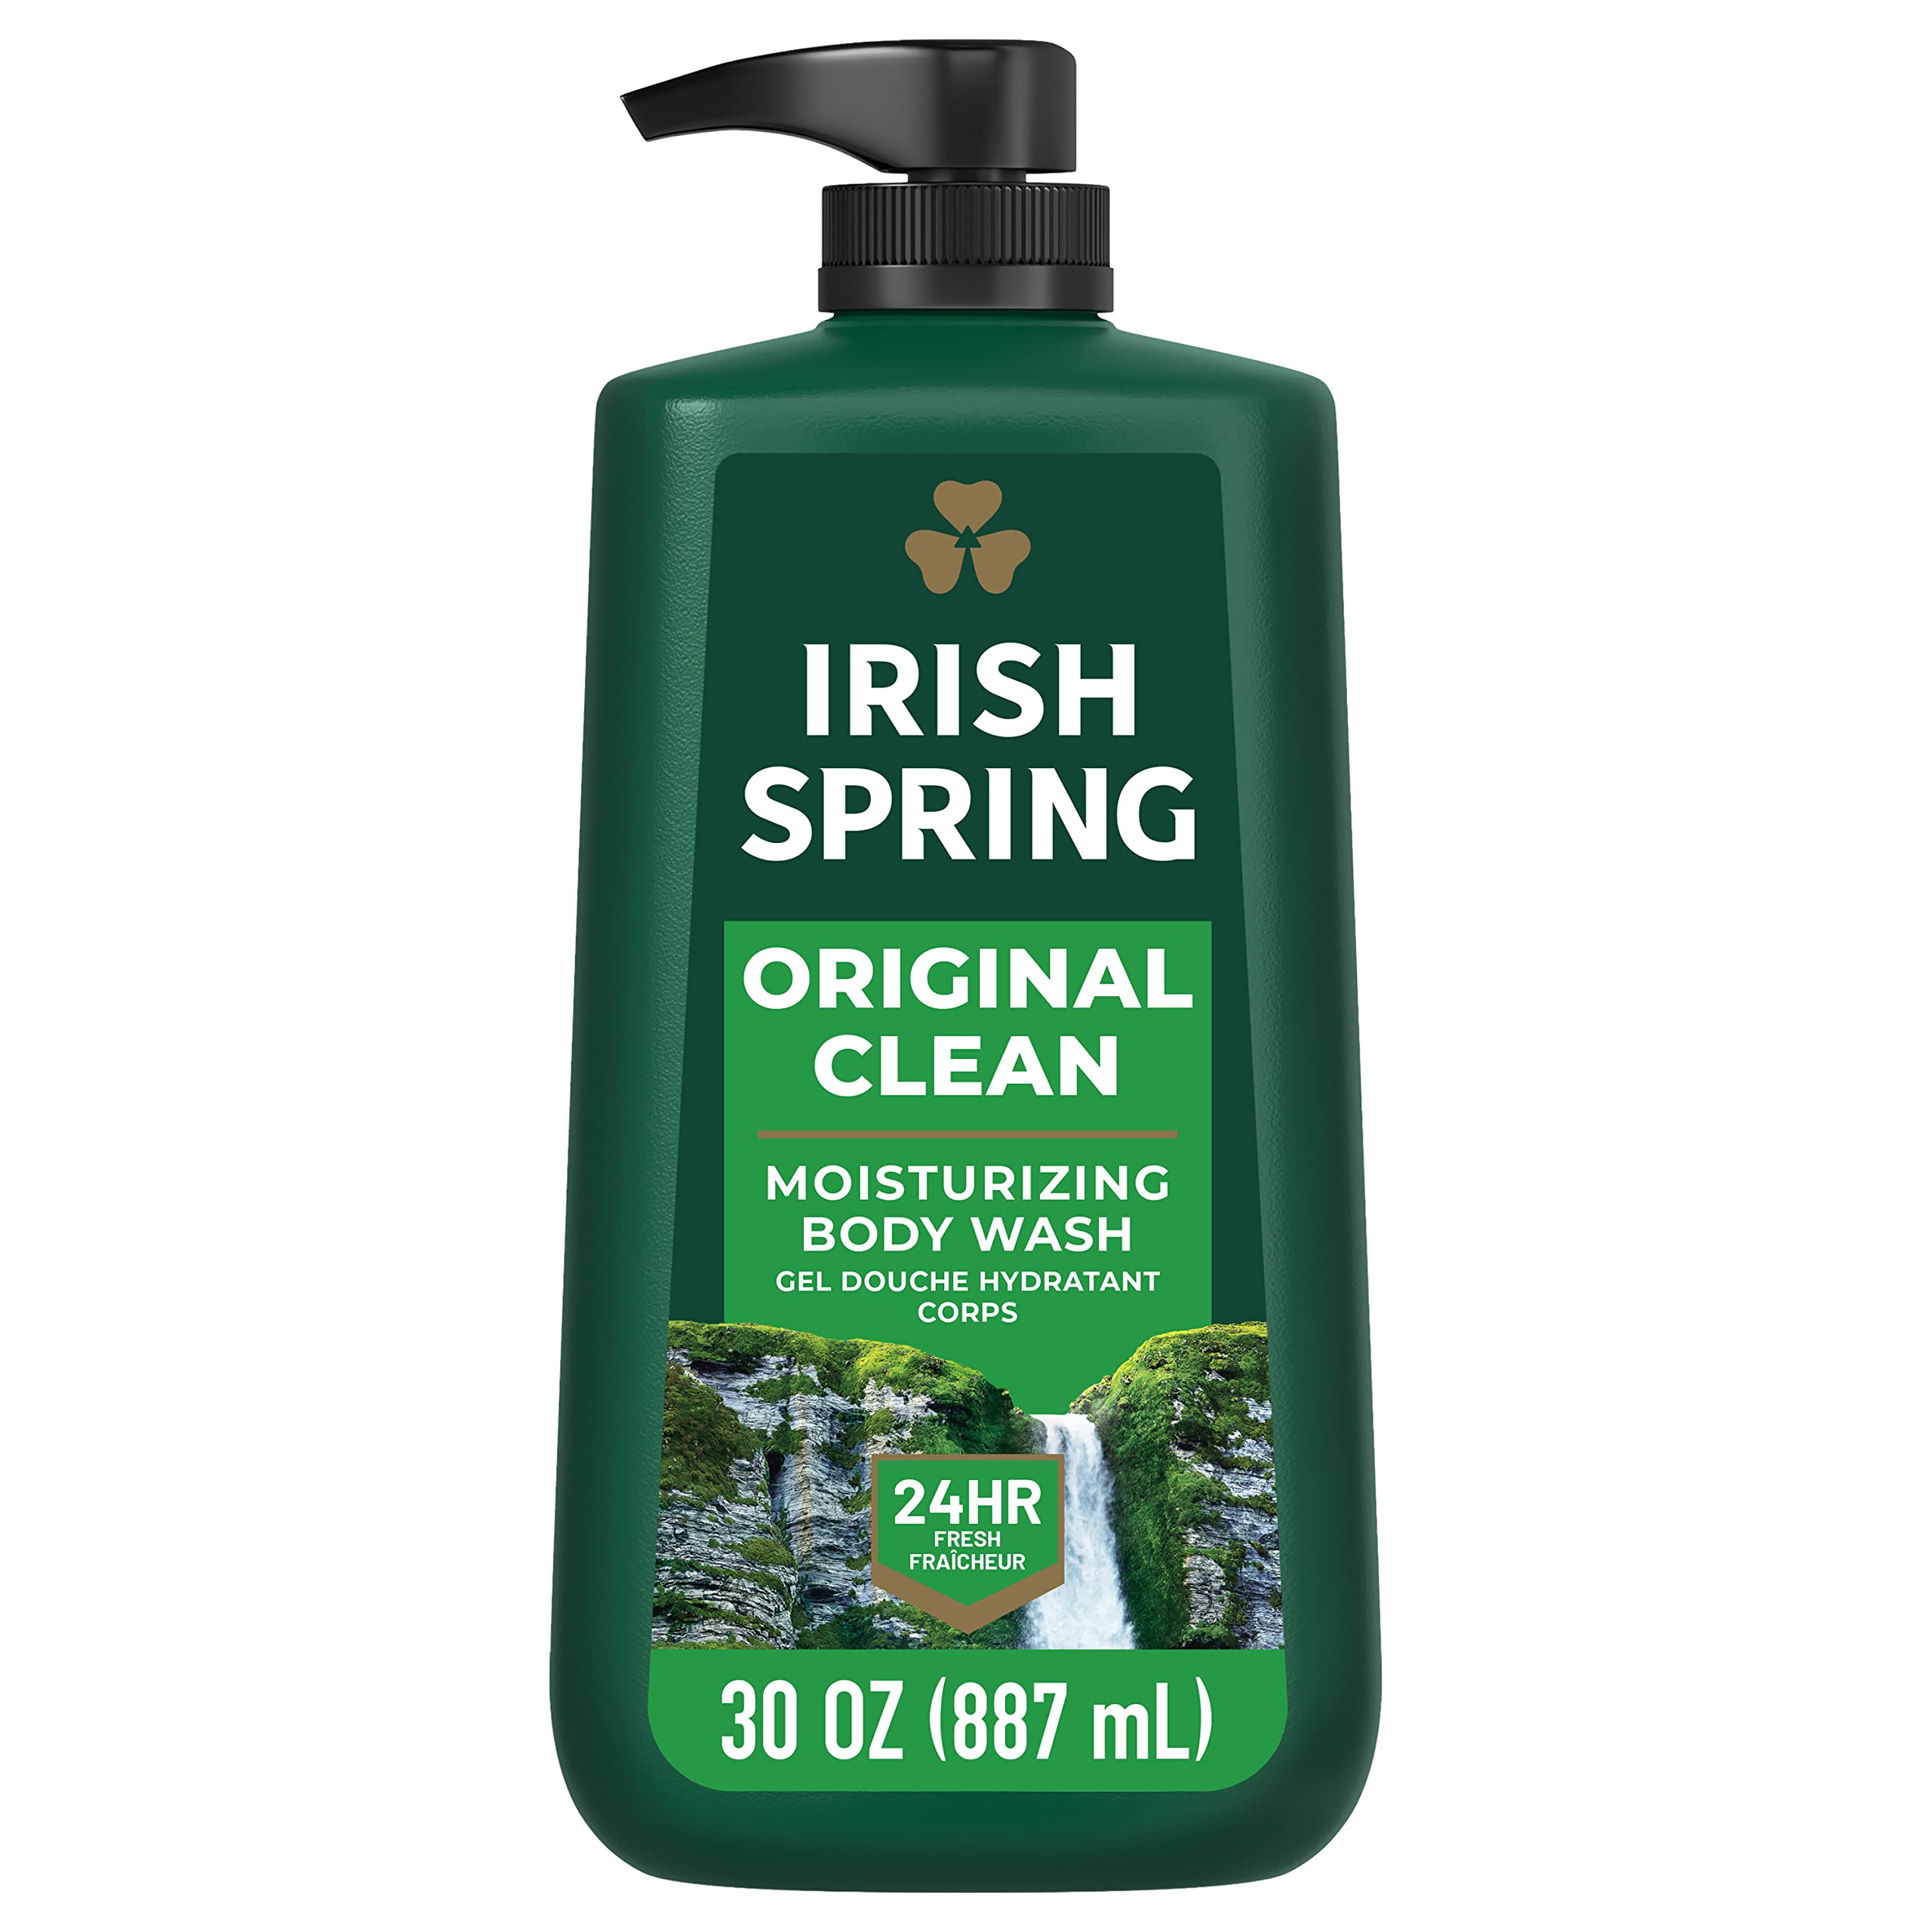 Irish Spring Men's Body Wash Pump, Original Clean Body Wash for Men, Smell Fresh and Clean for 24 Hours, Cleans Body, Hands, and